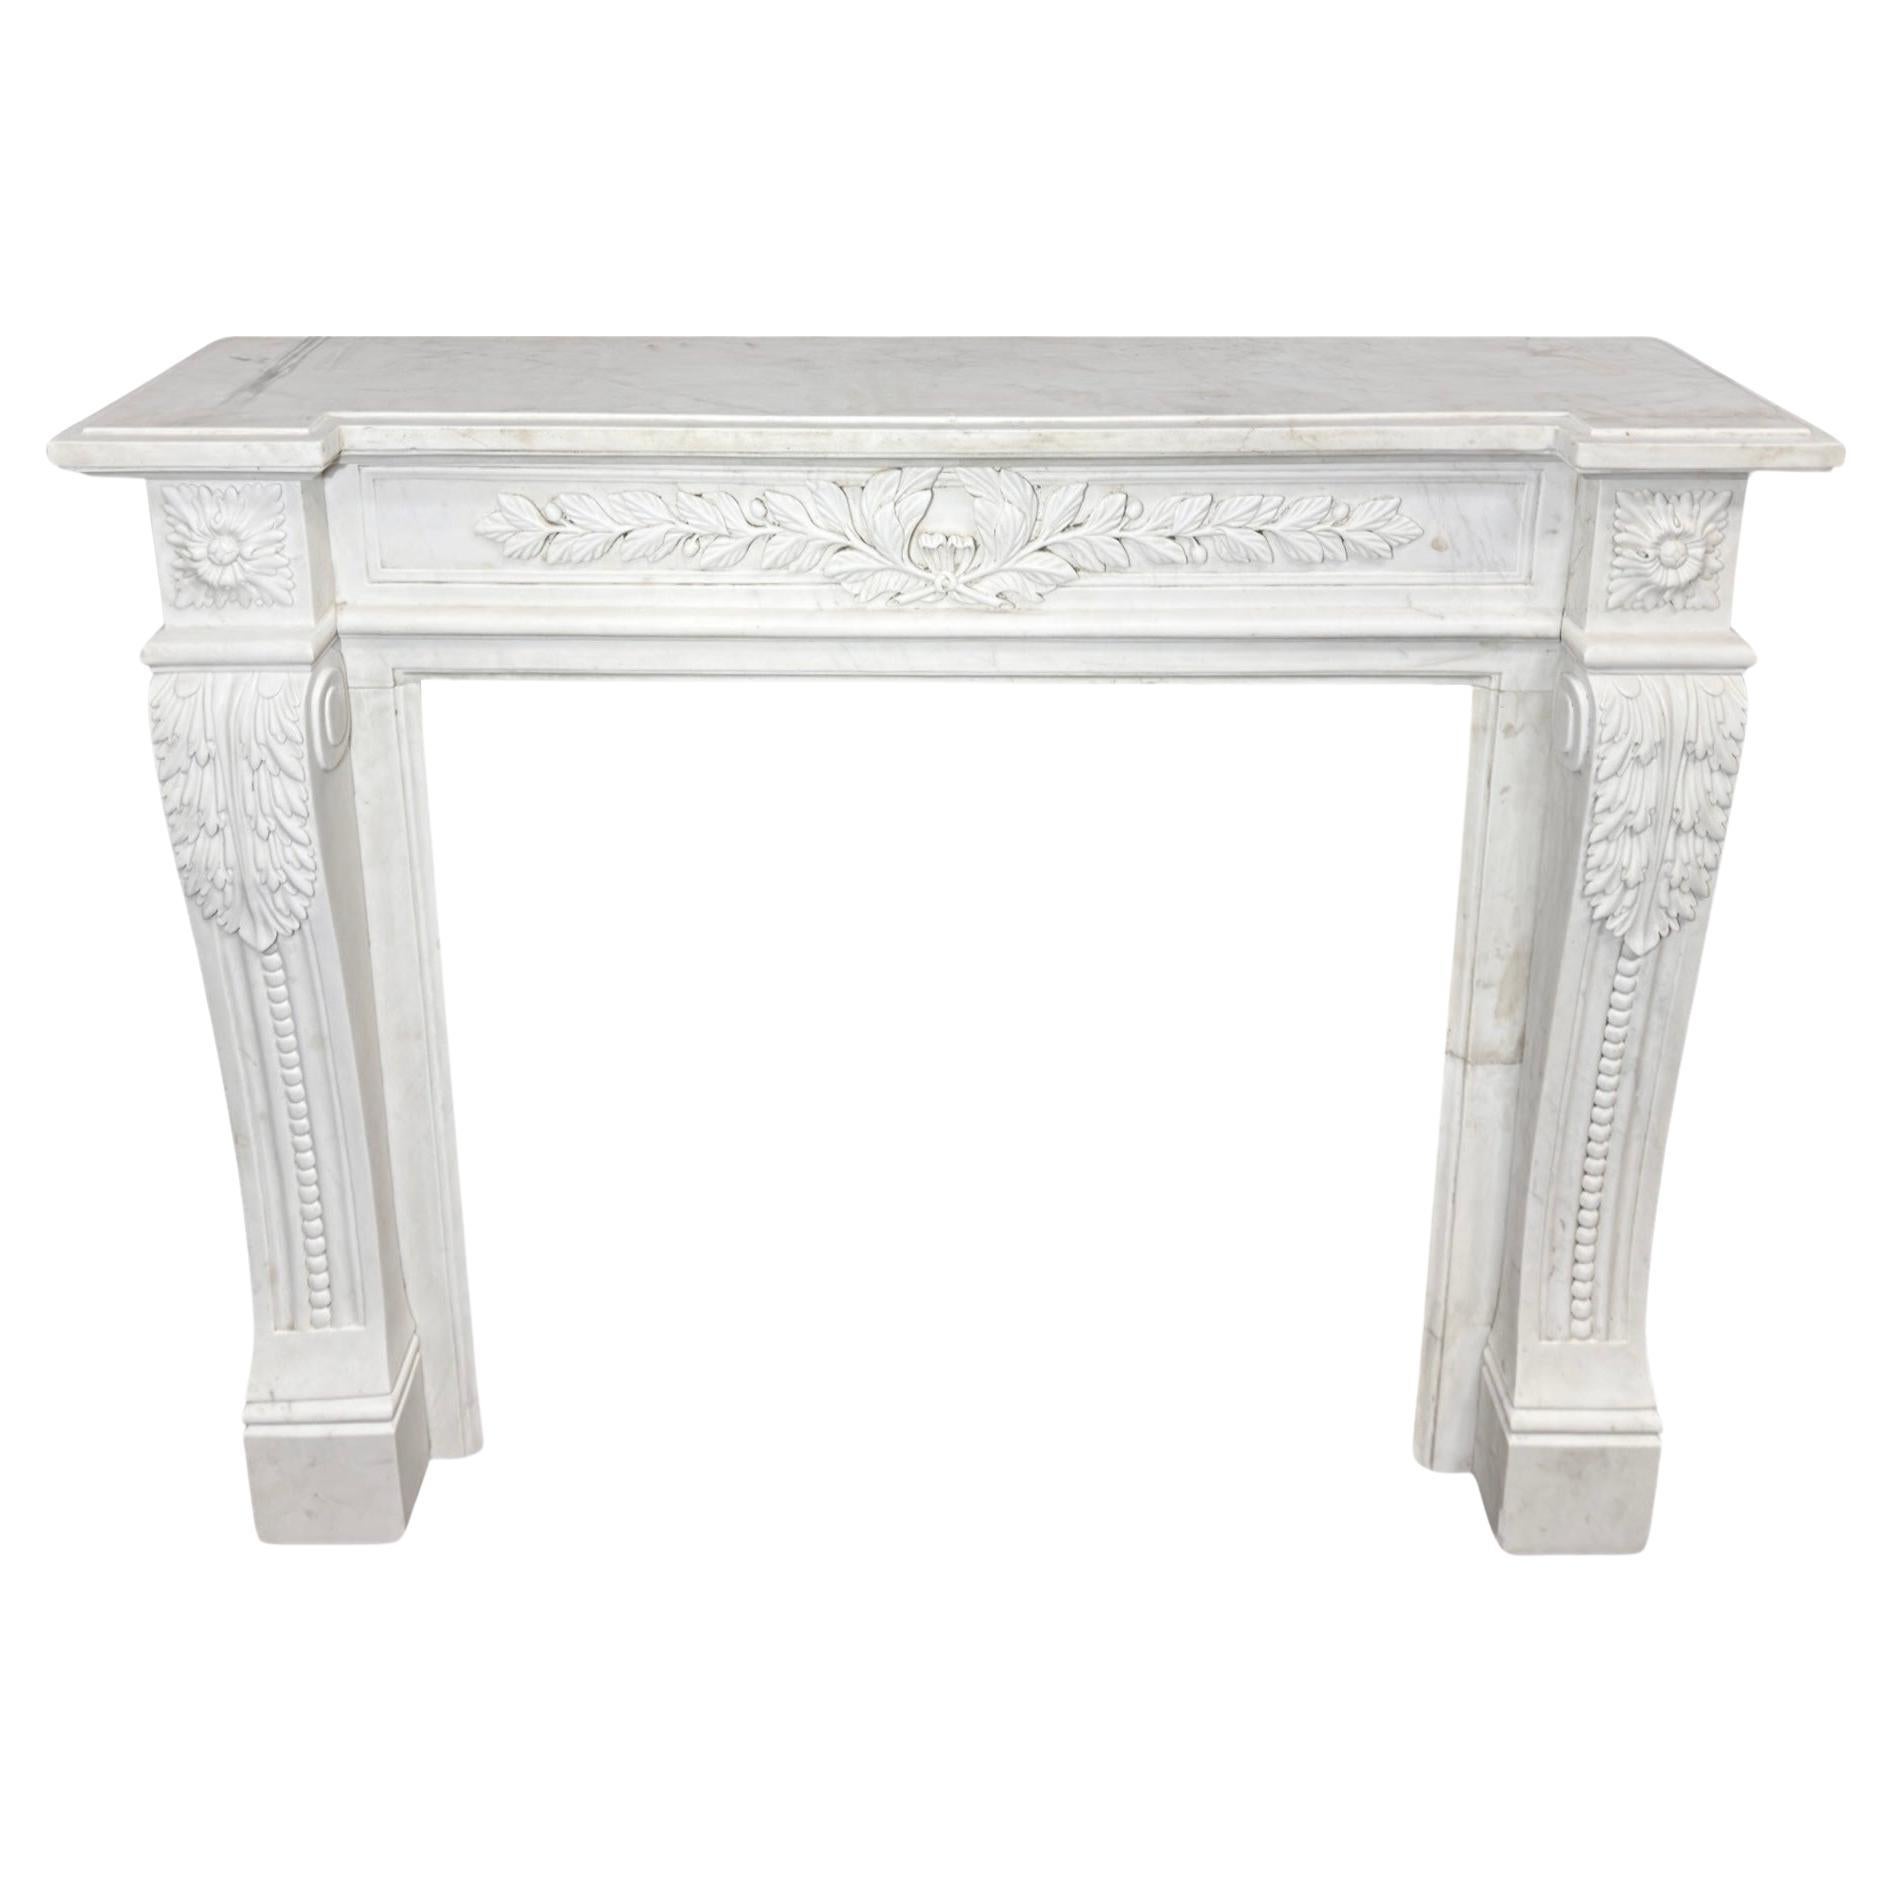 French Carrara Marble Mantel For Sale